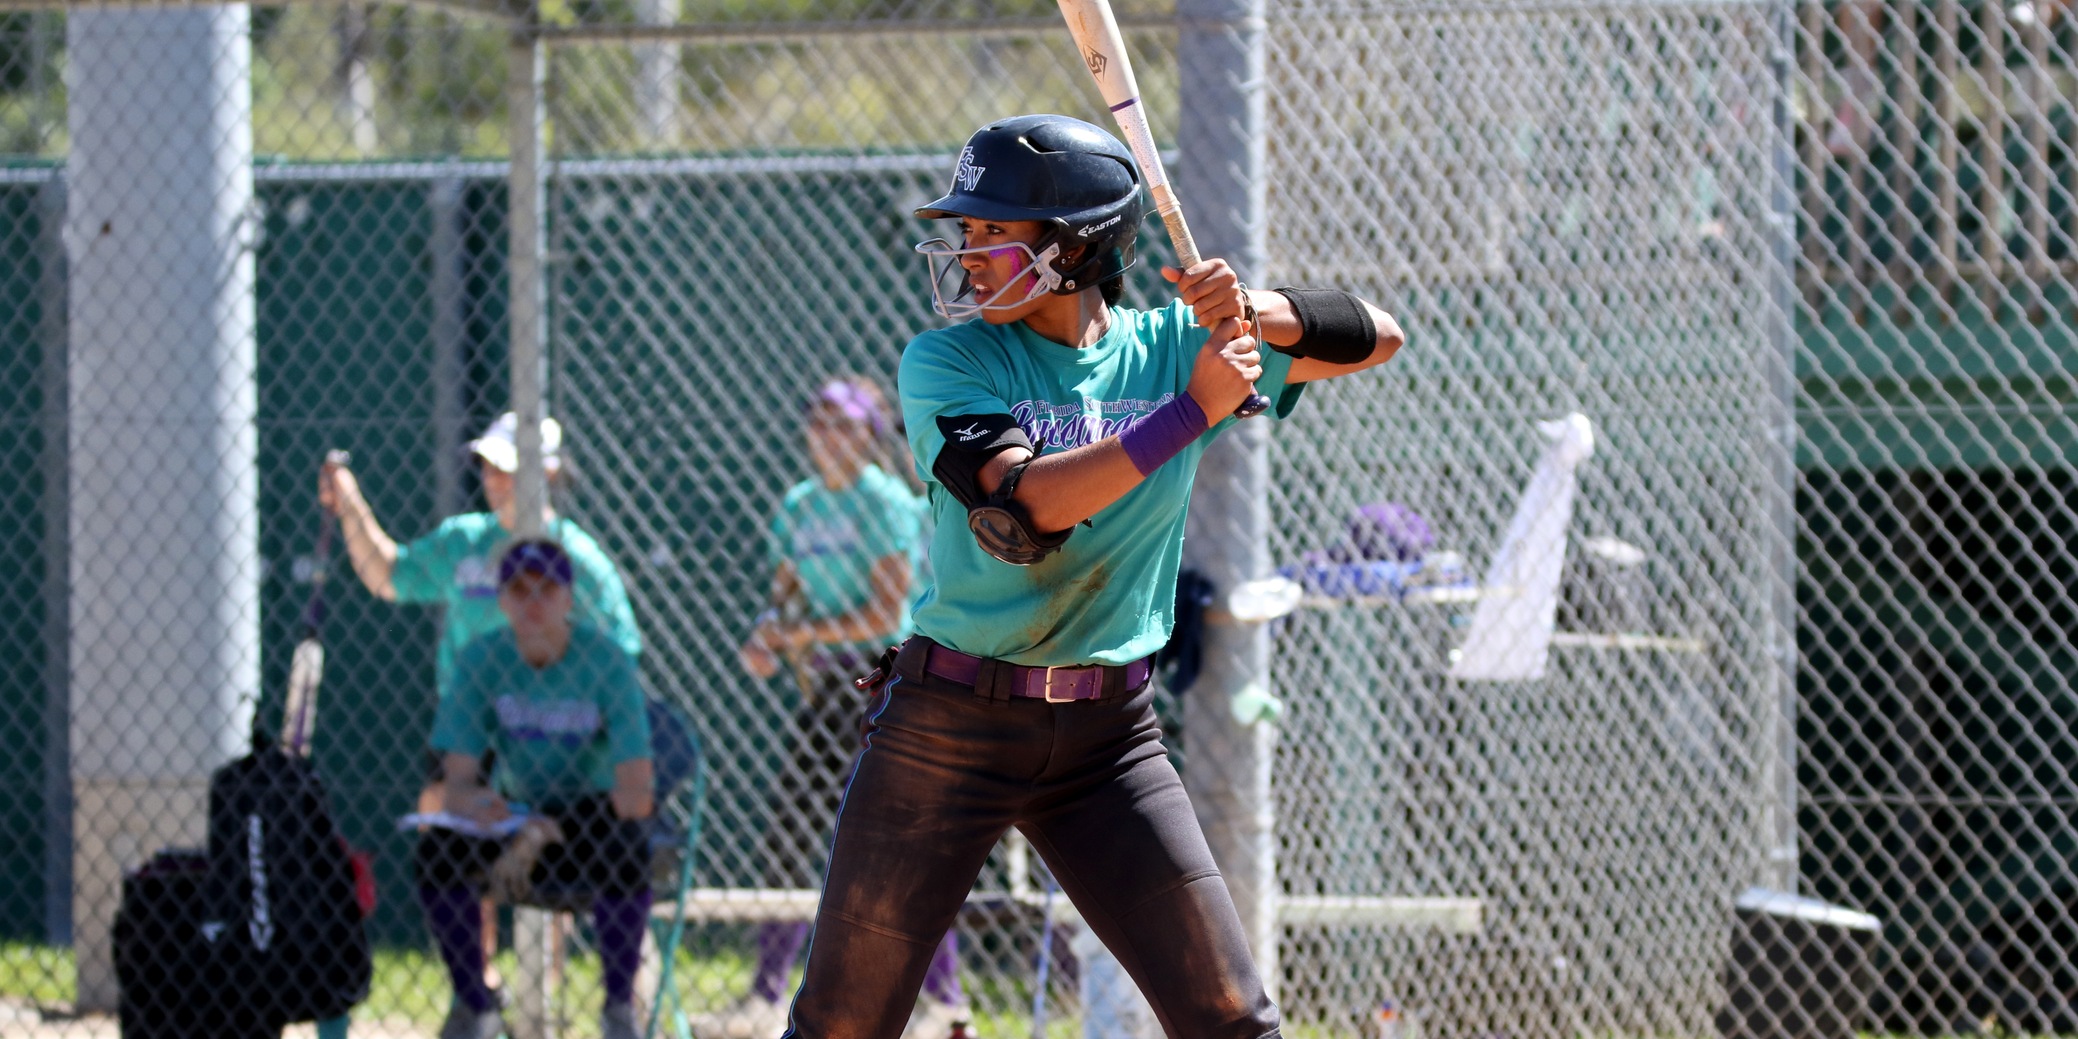 FSW's Rebeca Laudino Shatters All-Time Collegiate Softball Record with 49 Game Hit Streak